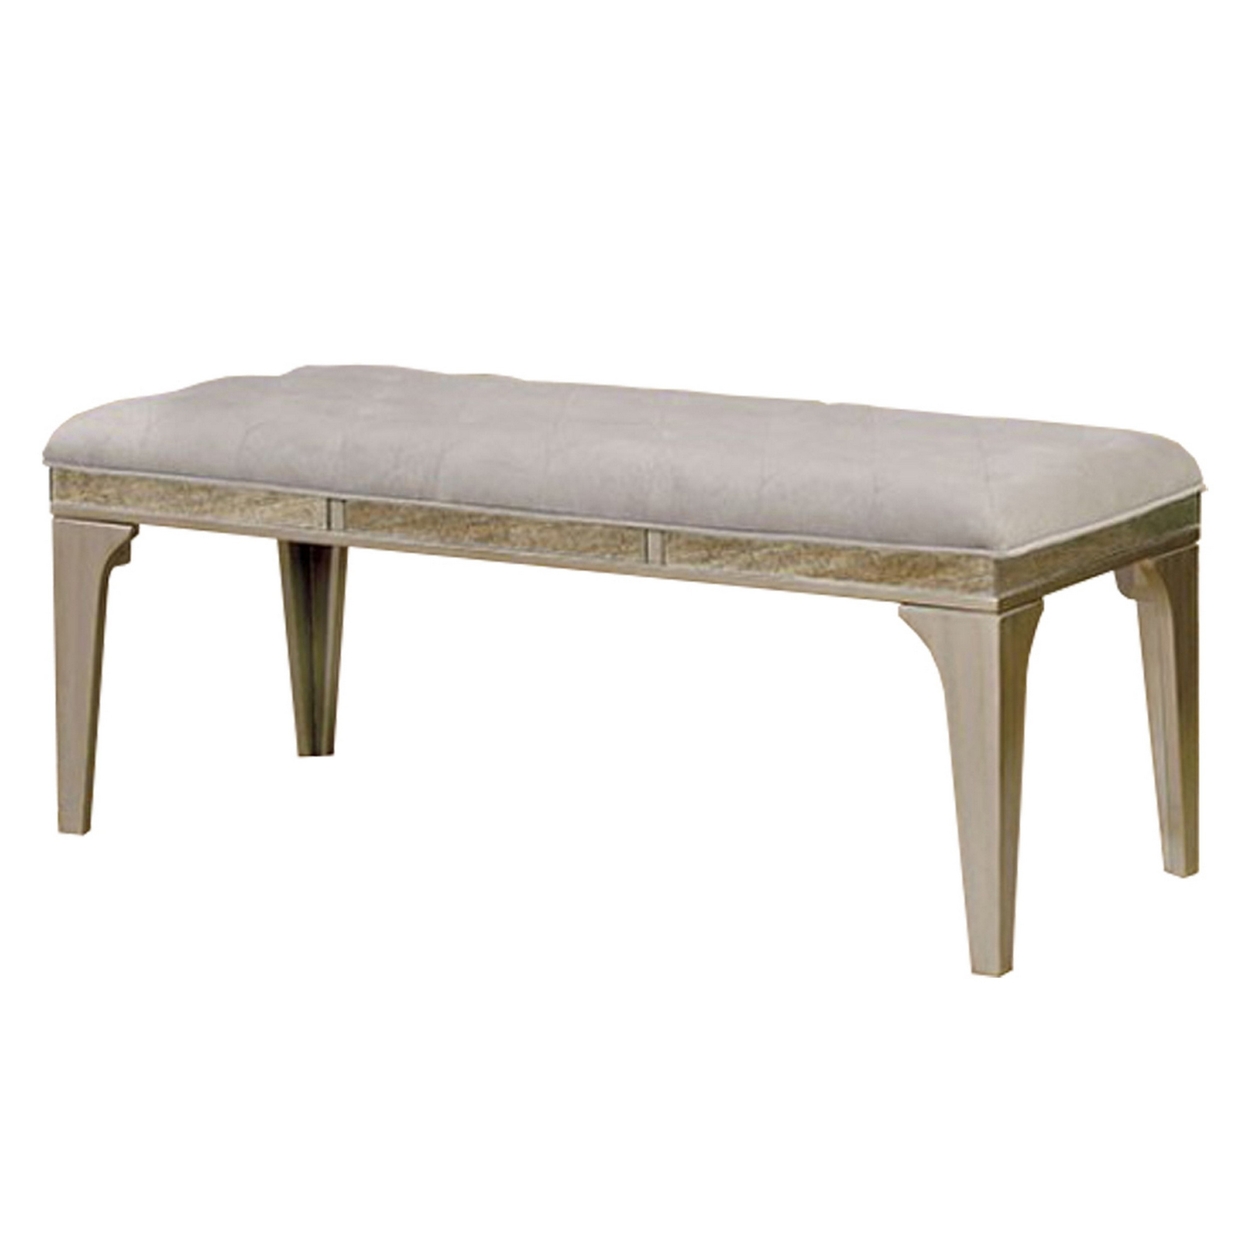 Wooden Bench With Comfy Cushioned Seat Gray- Saltoro Sherpi